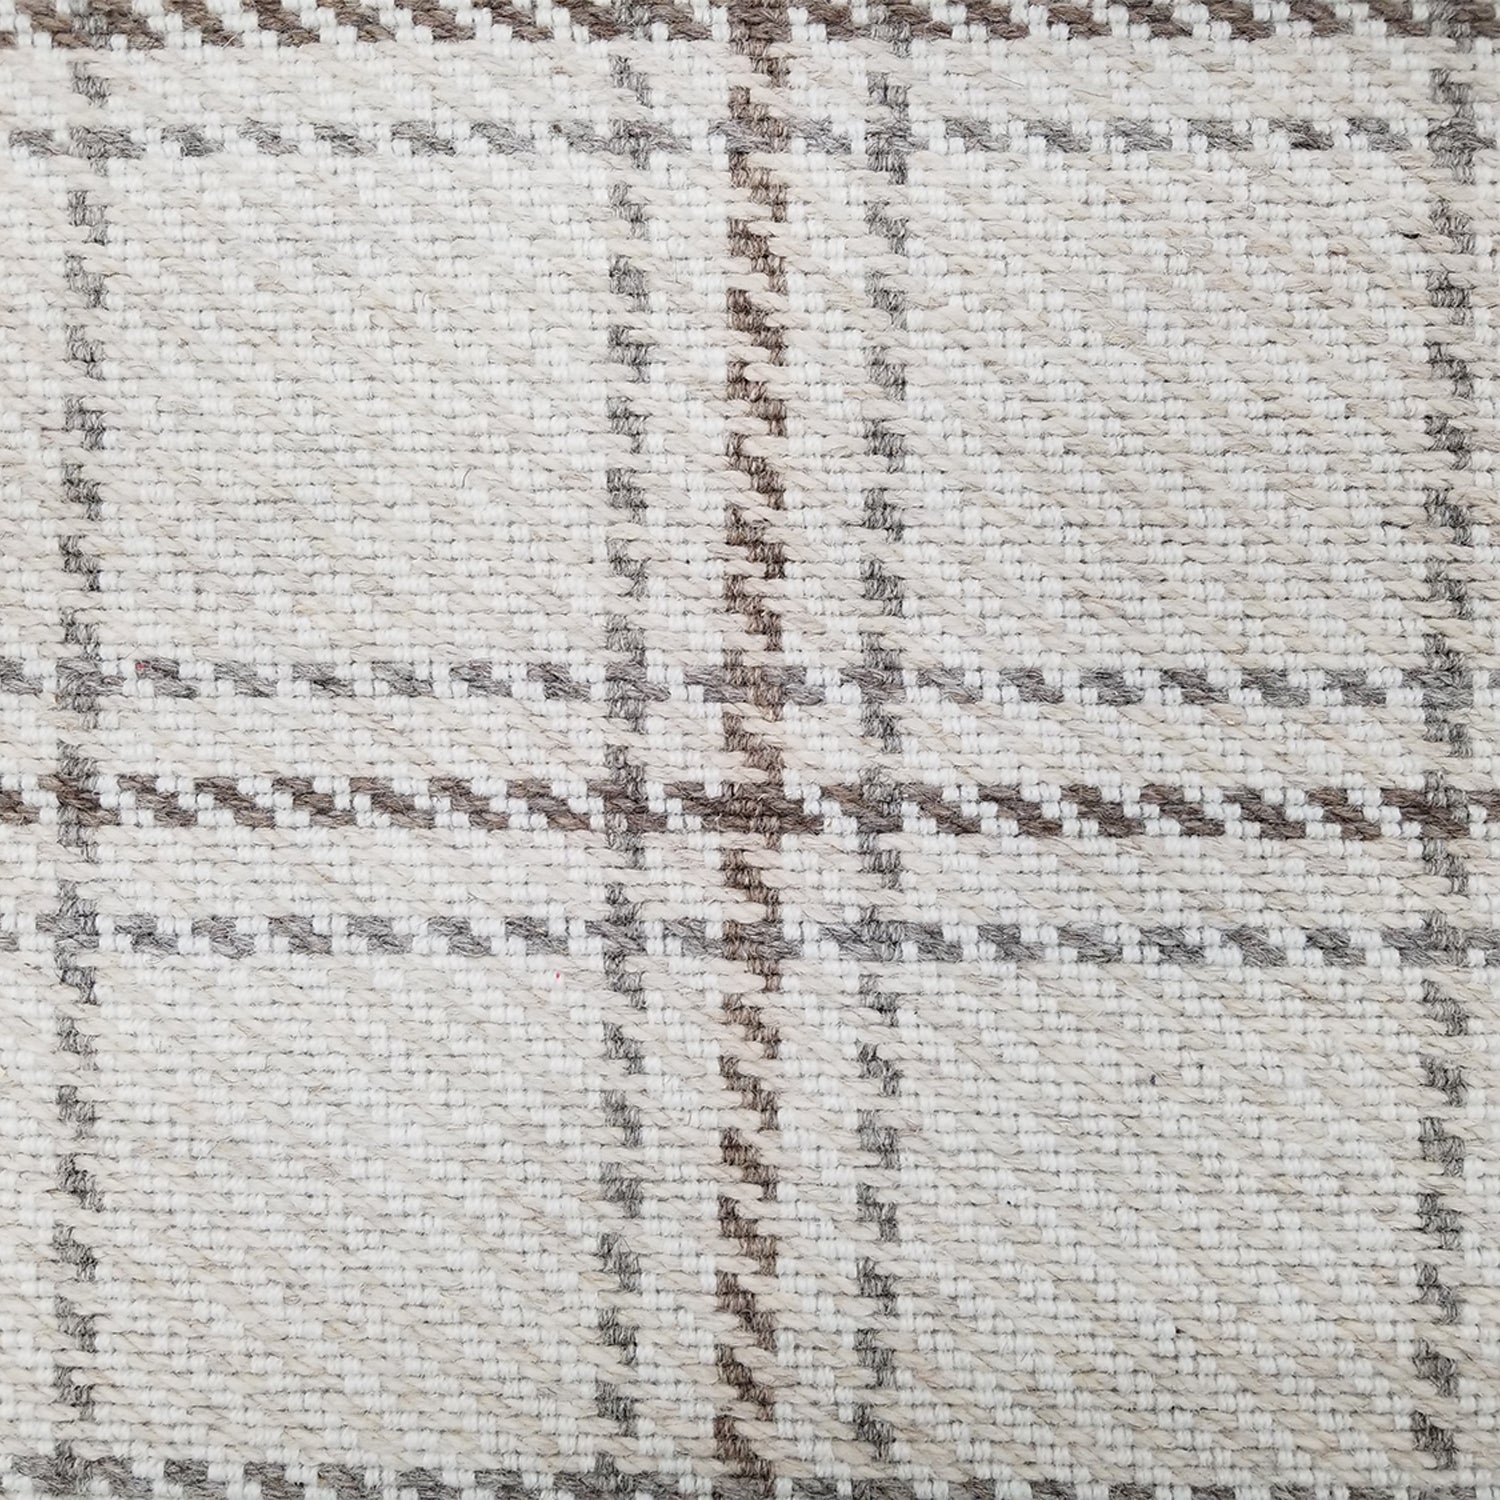 Wool broadloom carpet swatch in houndstooth plaid in shades of cream, gray and brown.